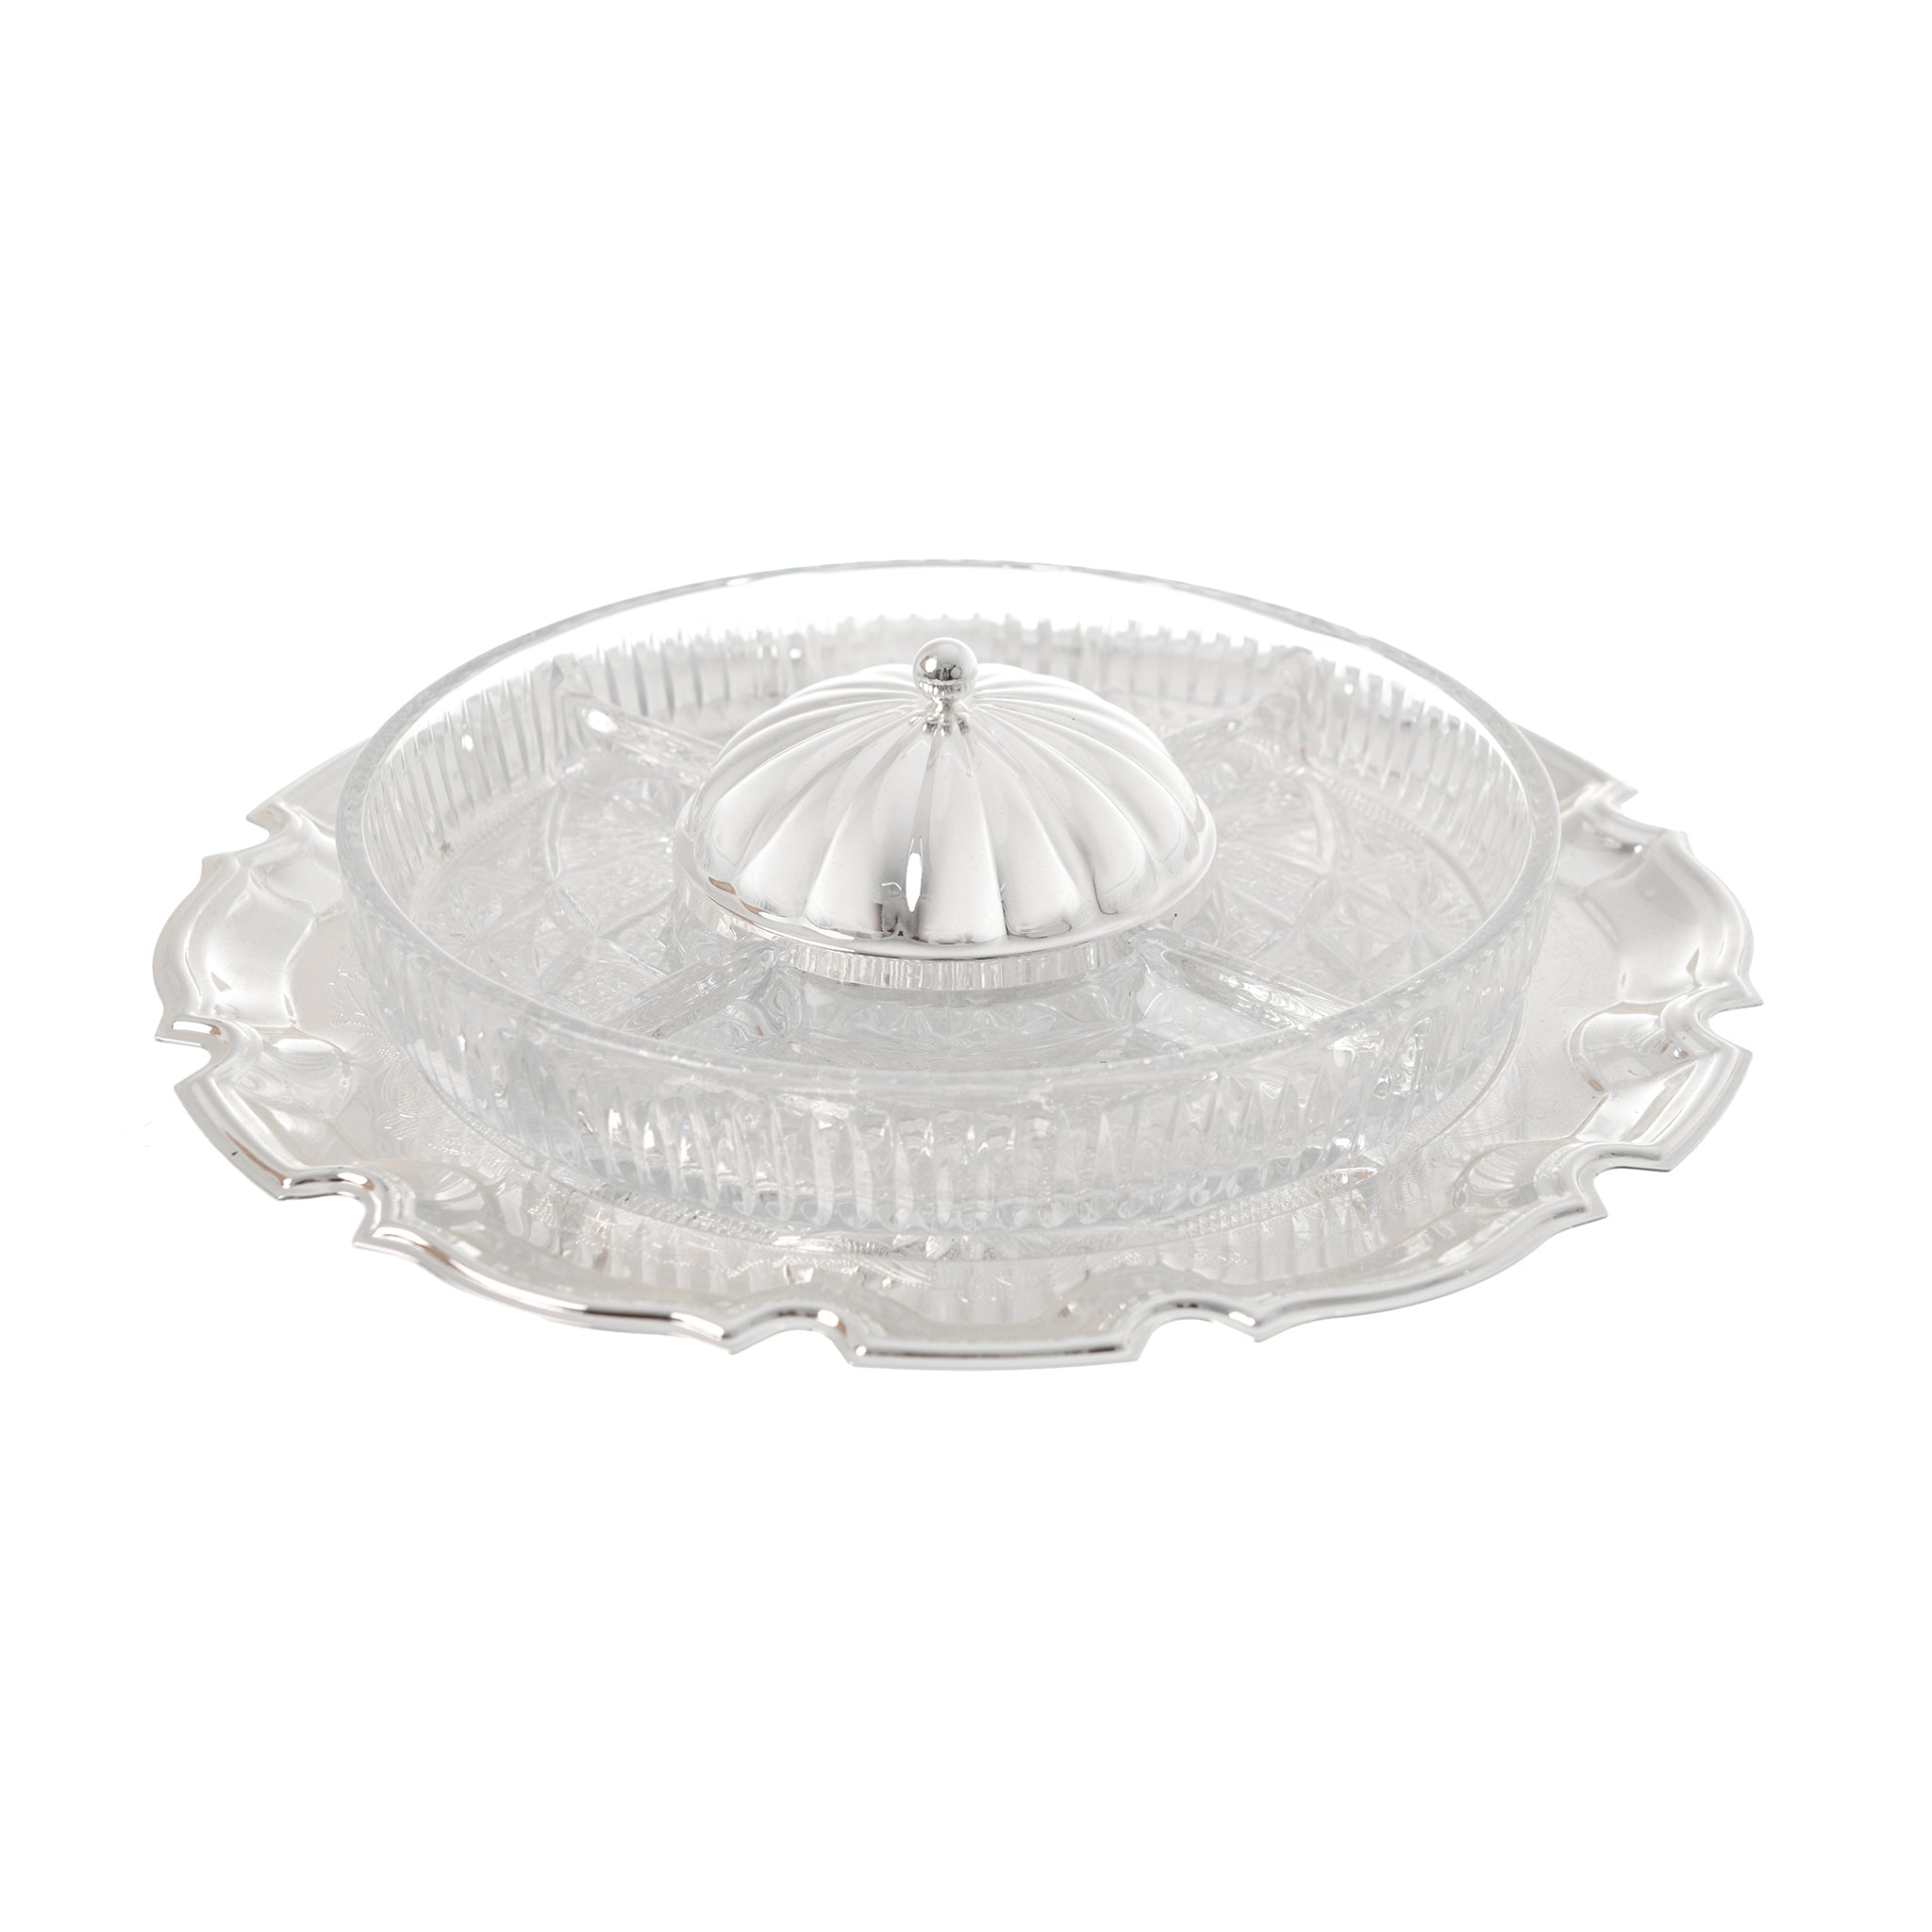 Queen Anne - Round Hors d'oeuvre 5 Parts with Silver Plated Center Cover & Tray - Silver Plated Metal & Glass - 25cm - 26000447